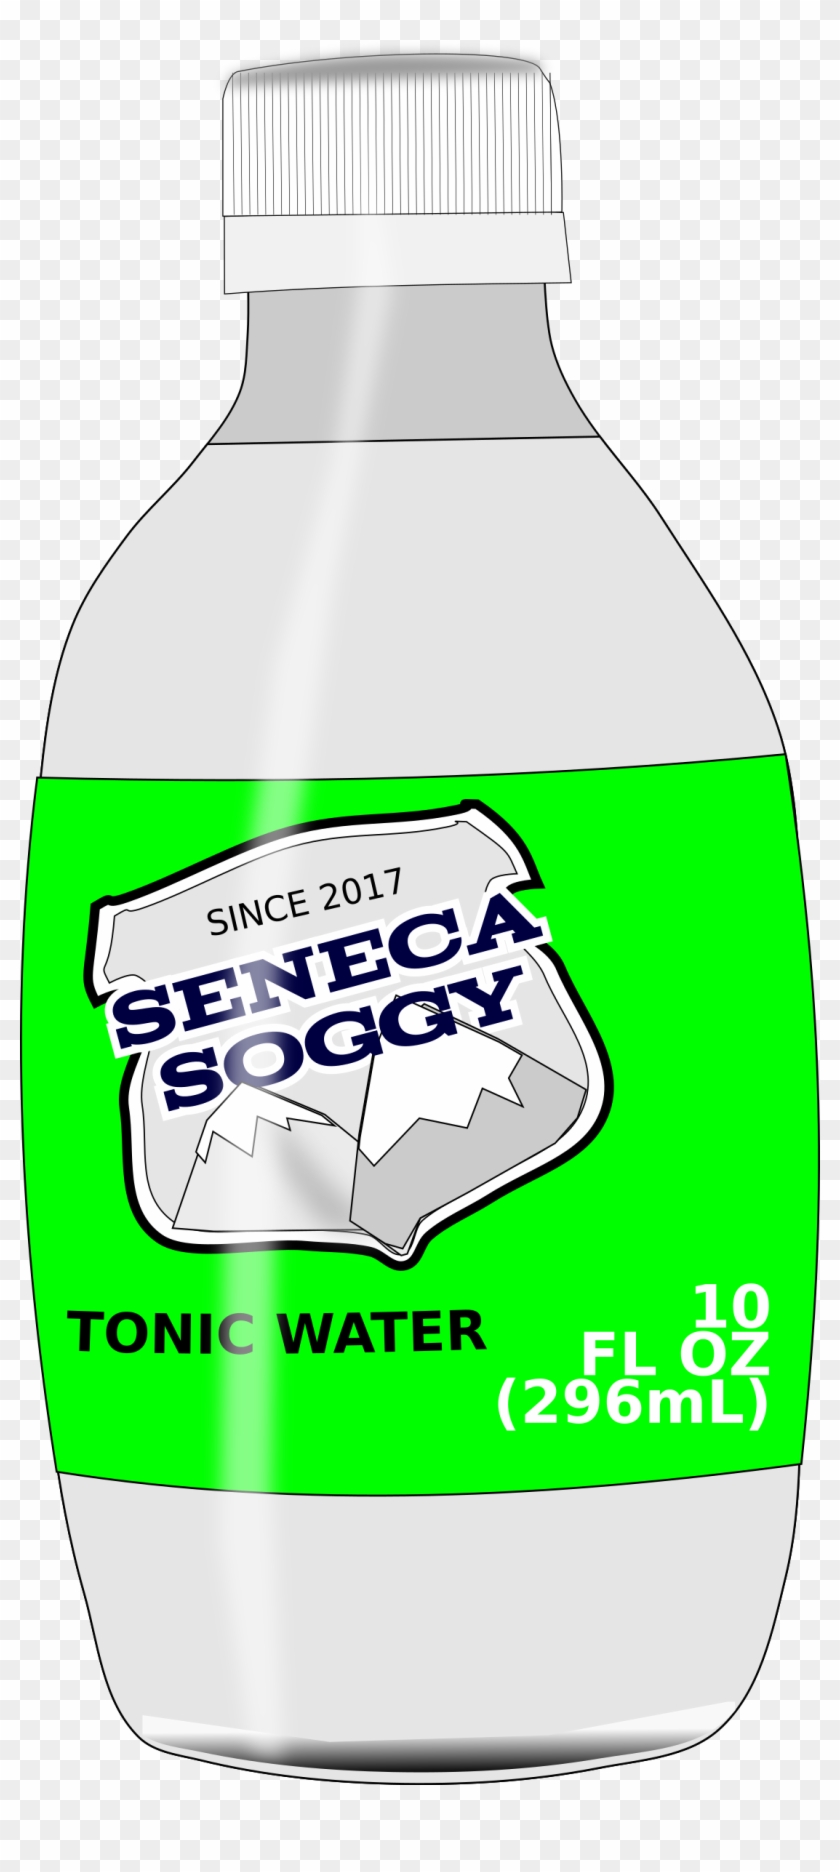 Big Image - Tonic Water Clipart #2312819